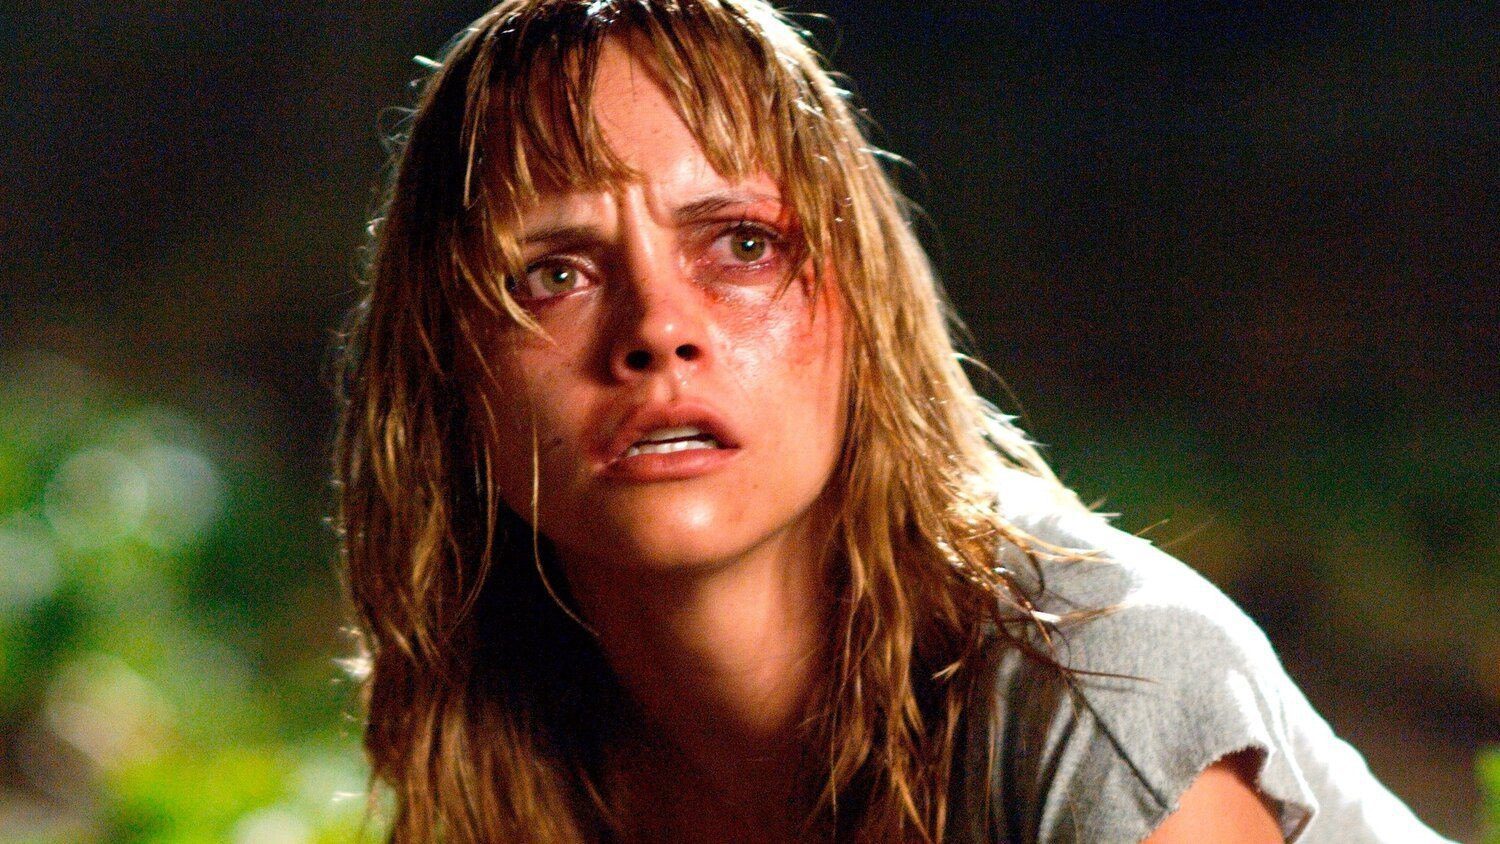 MONSTROUS starring Christina Ricci at FrightFest This March